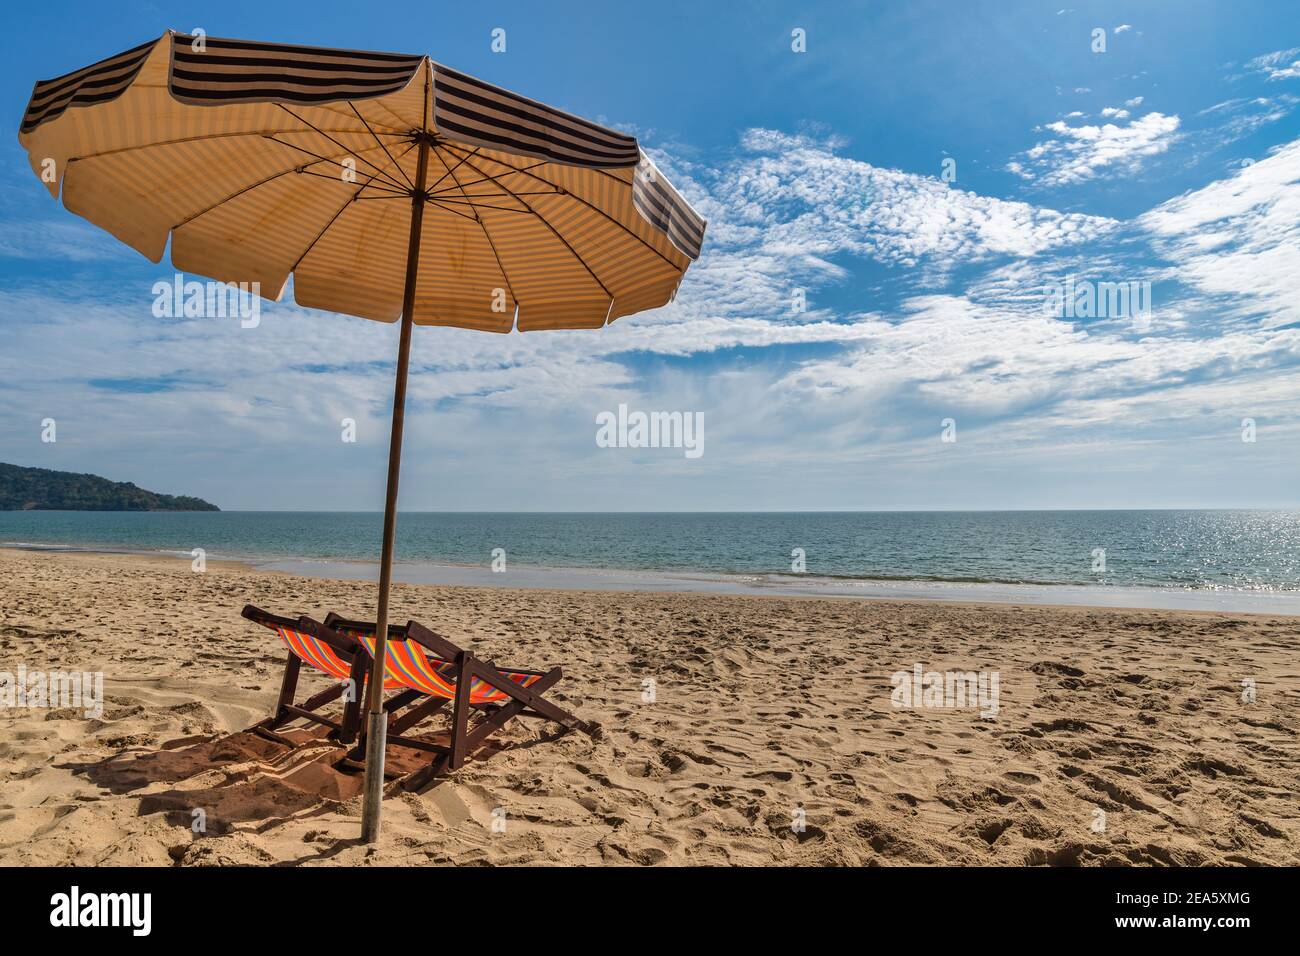 Beach summer travel vacation concept with chair umbrella white sand beach blue sky and sea water ocean Stock Photo